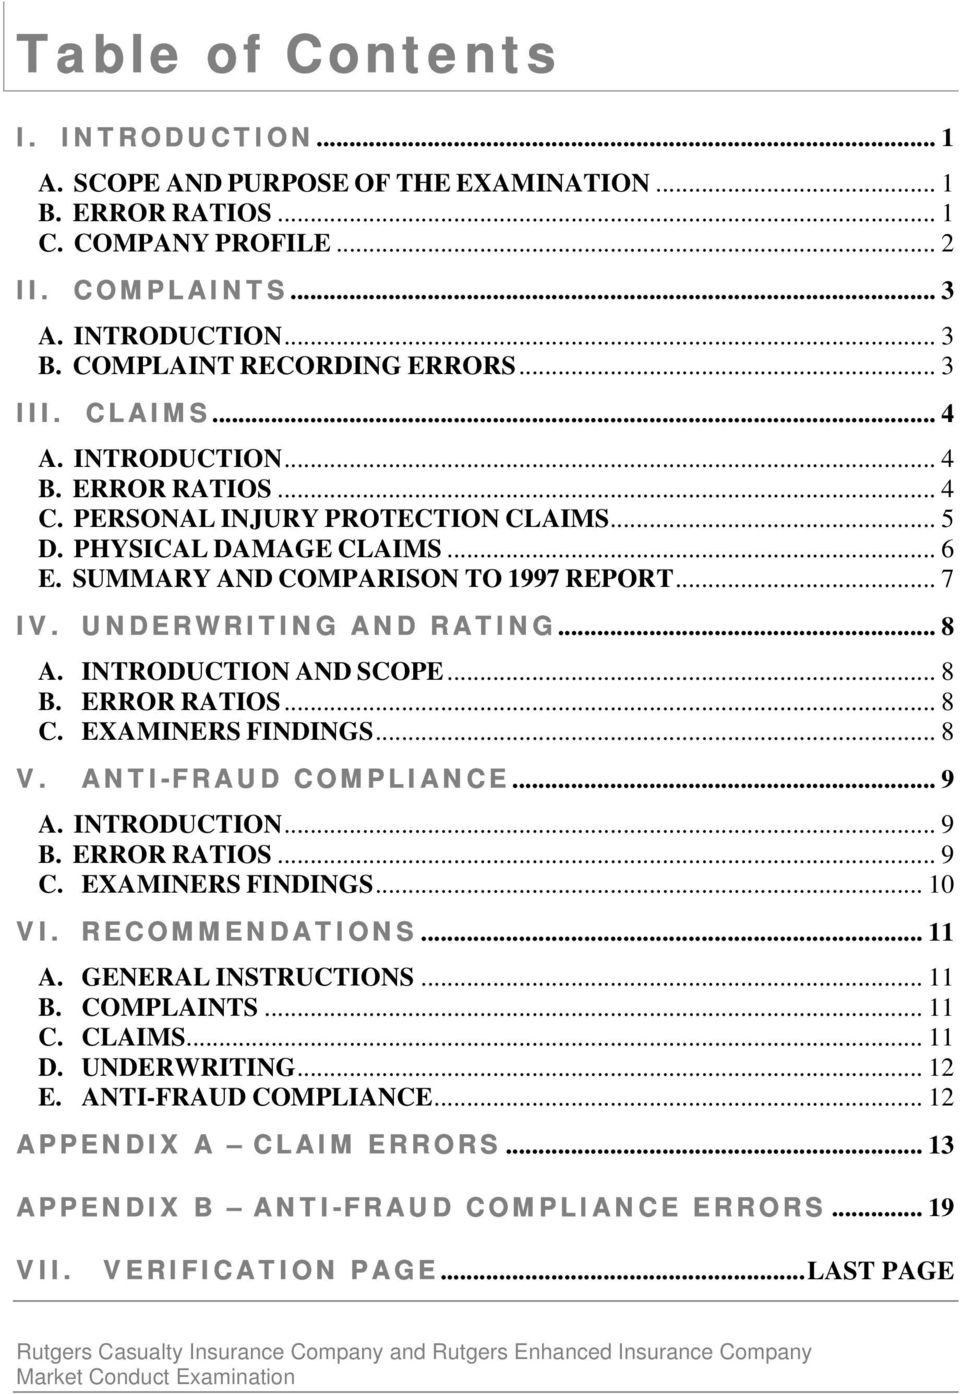 UNDERWRITING AND RATING... 8 A. INTRODUCTION AND SCOPE... 8 B. ERROR RATIOS... 8 C. EXAMINERS FINDINGS... 8 V. ANTI-FRAUD COMPLIANCE... 9 A. INTRODUCTION... 9 B. ERROR RATIOS... 9 C.